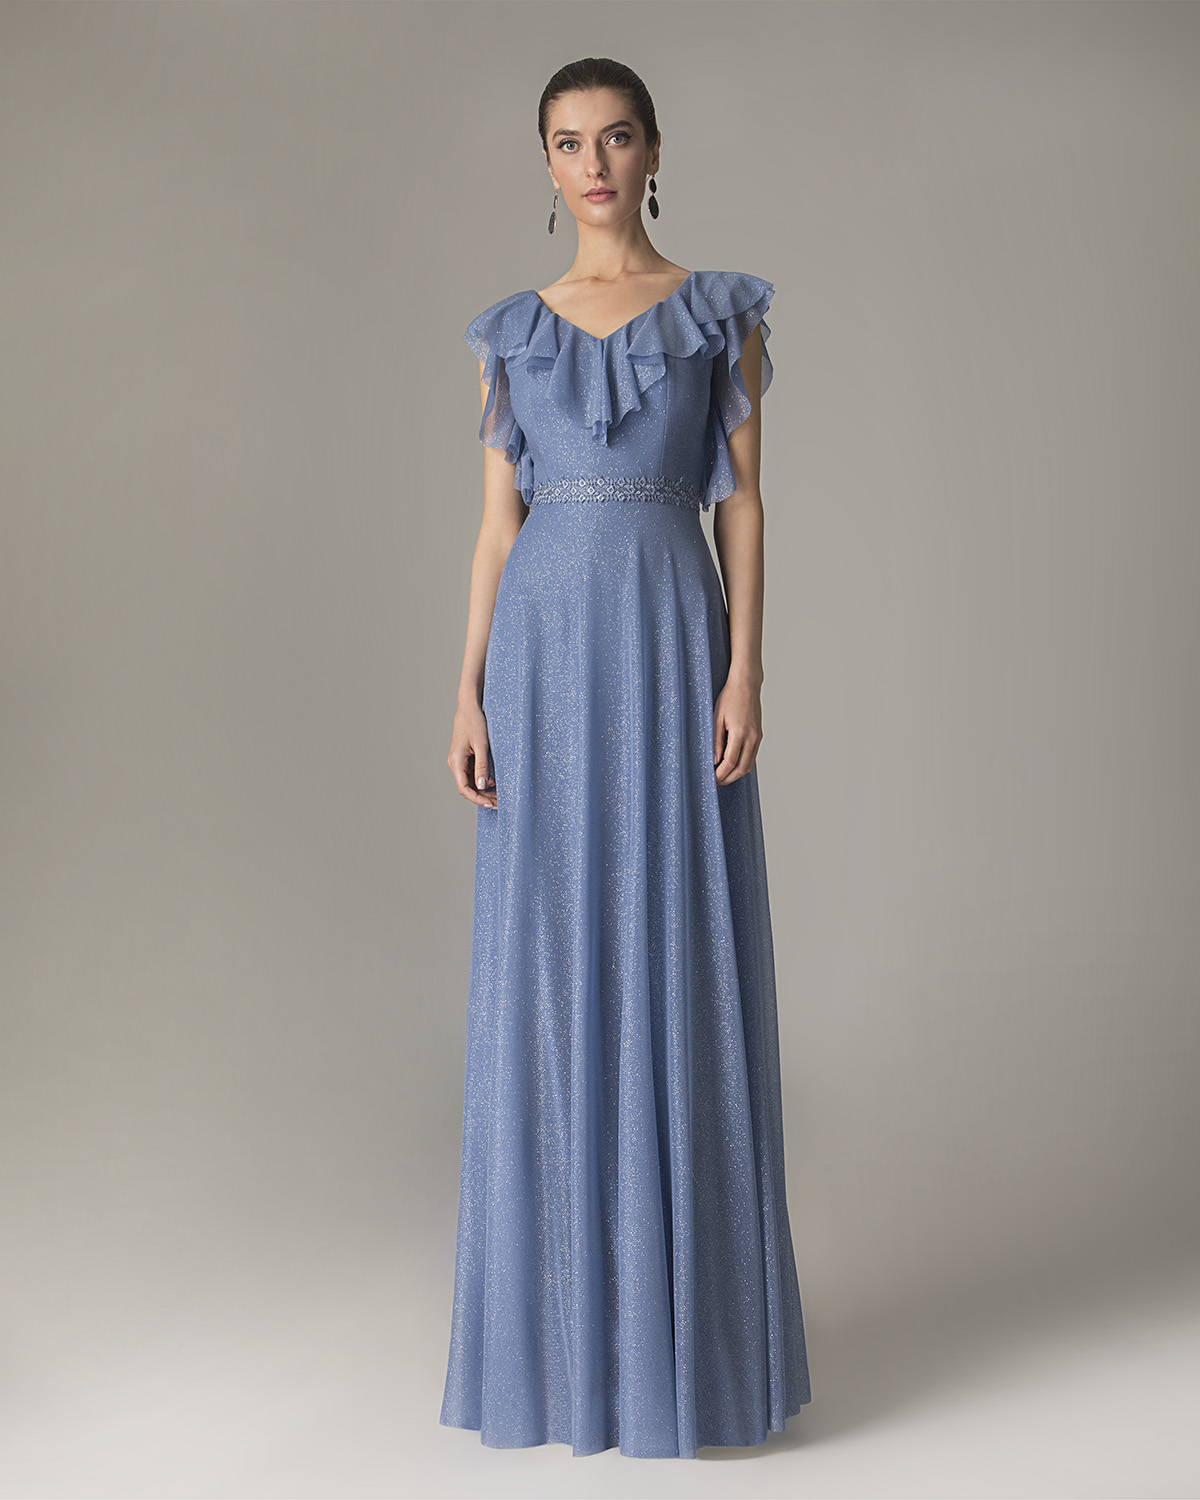 Long shining dress with ruffles on the sleeves and lace on the waist